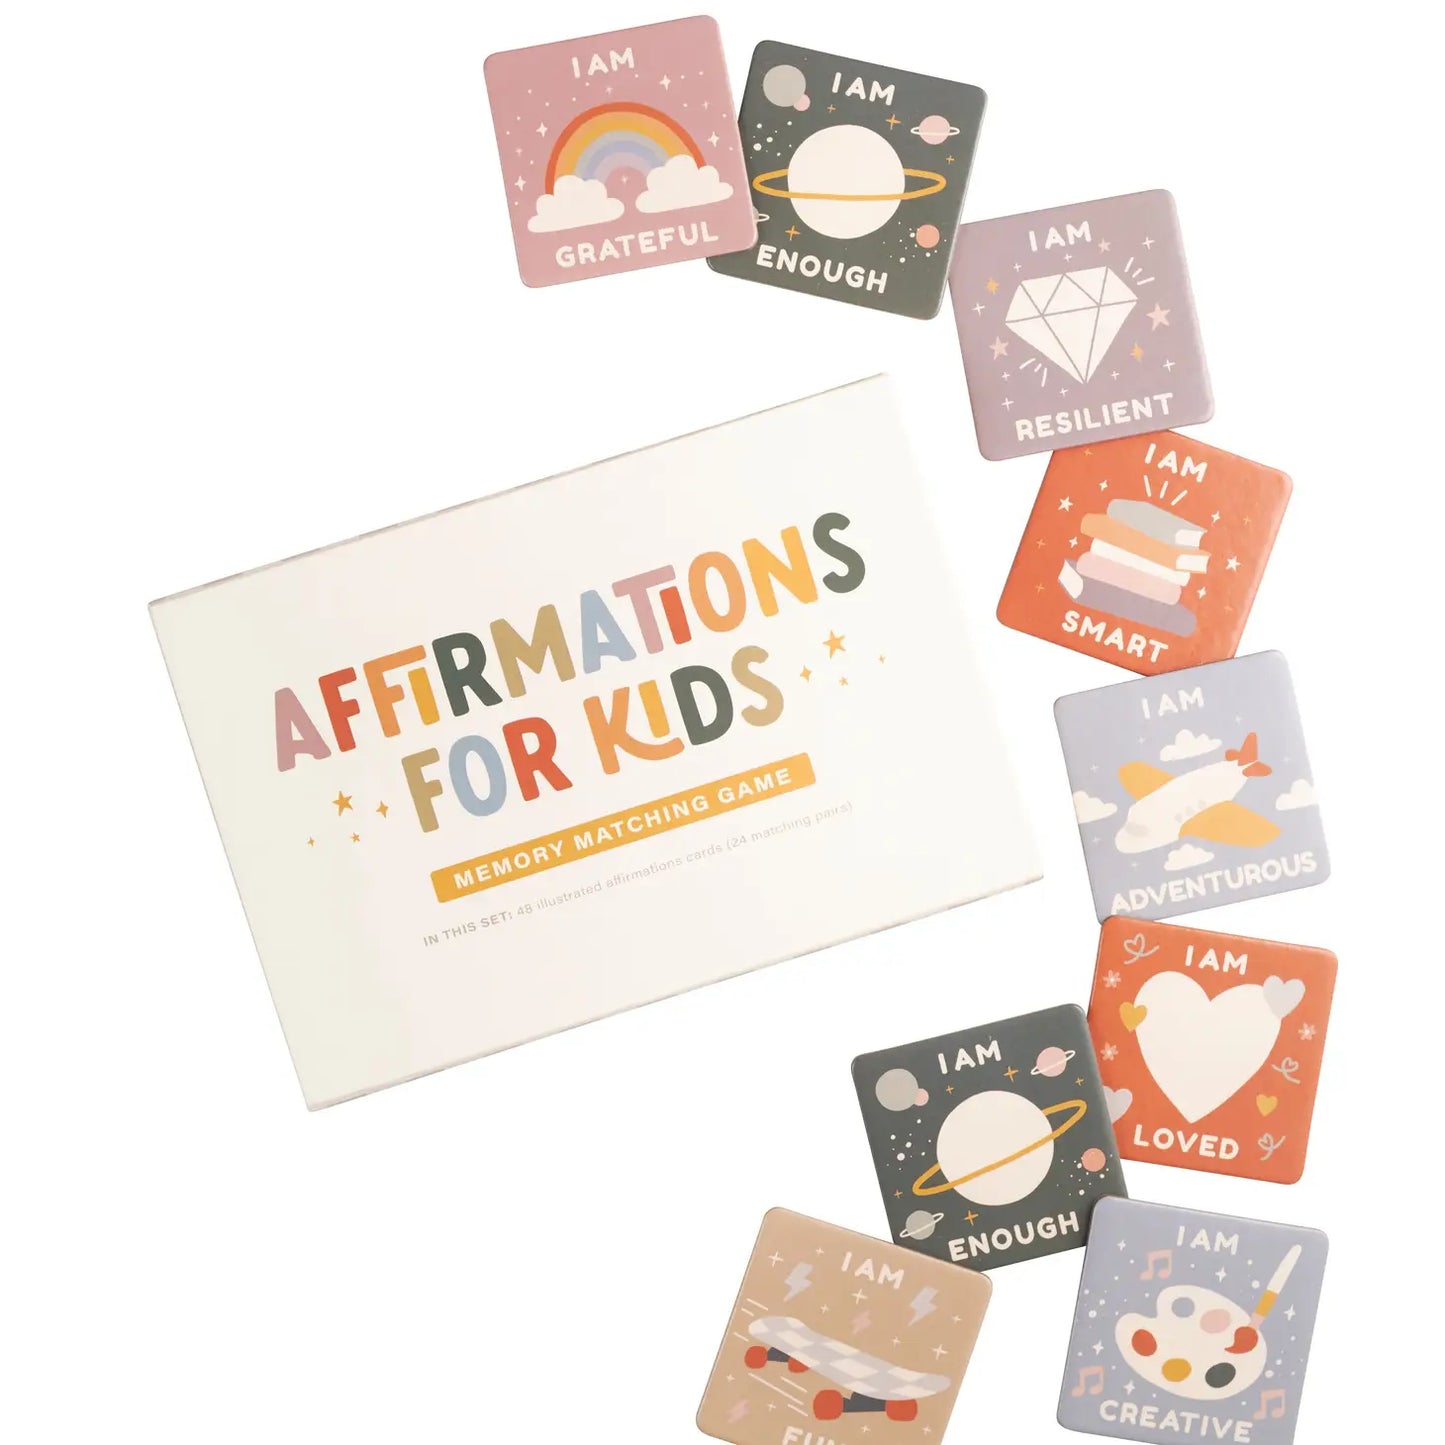 Cherrypick - Affirmations for Kids Memory Matching Game